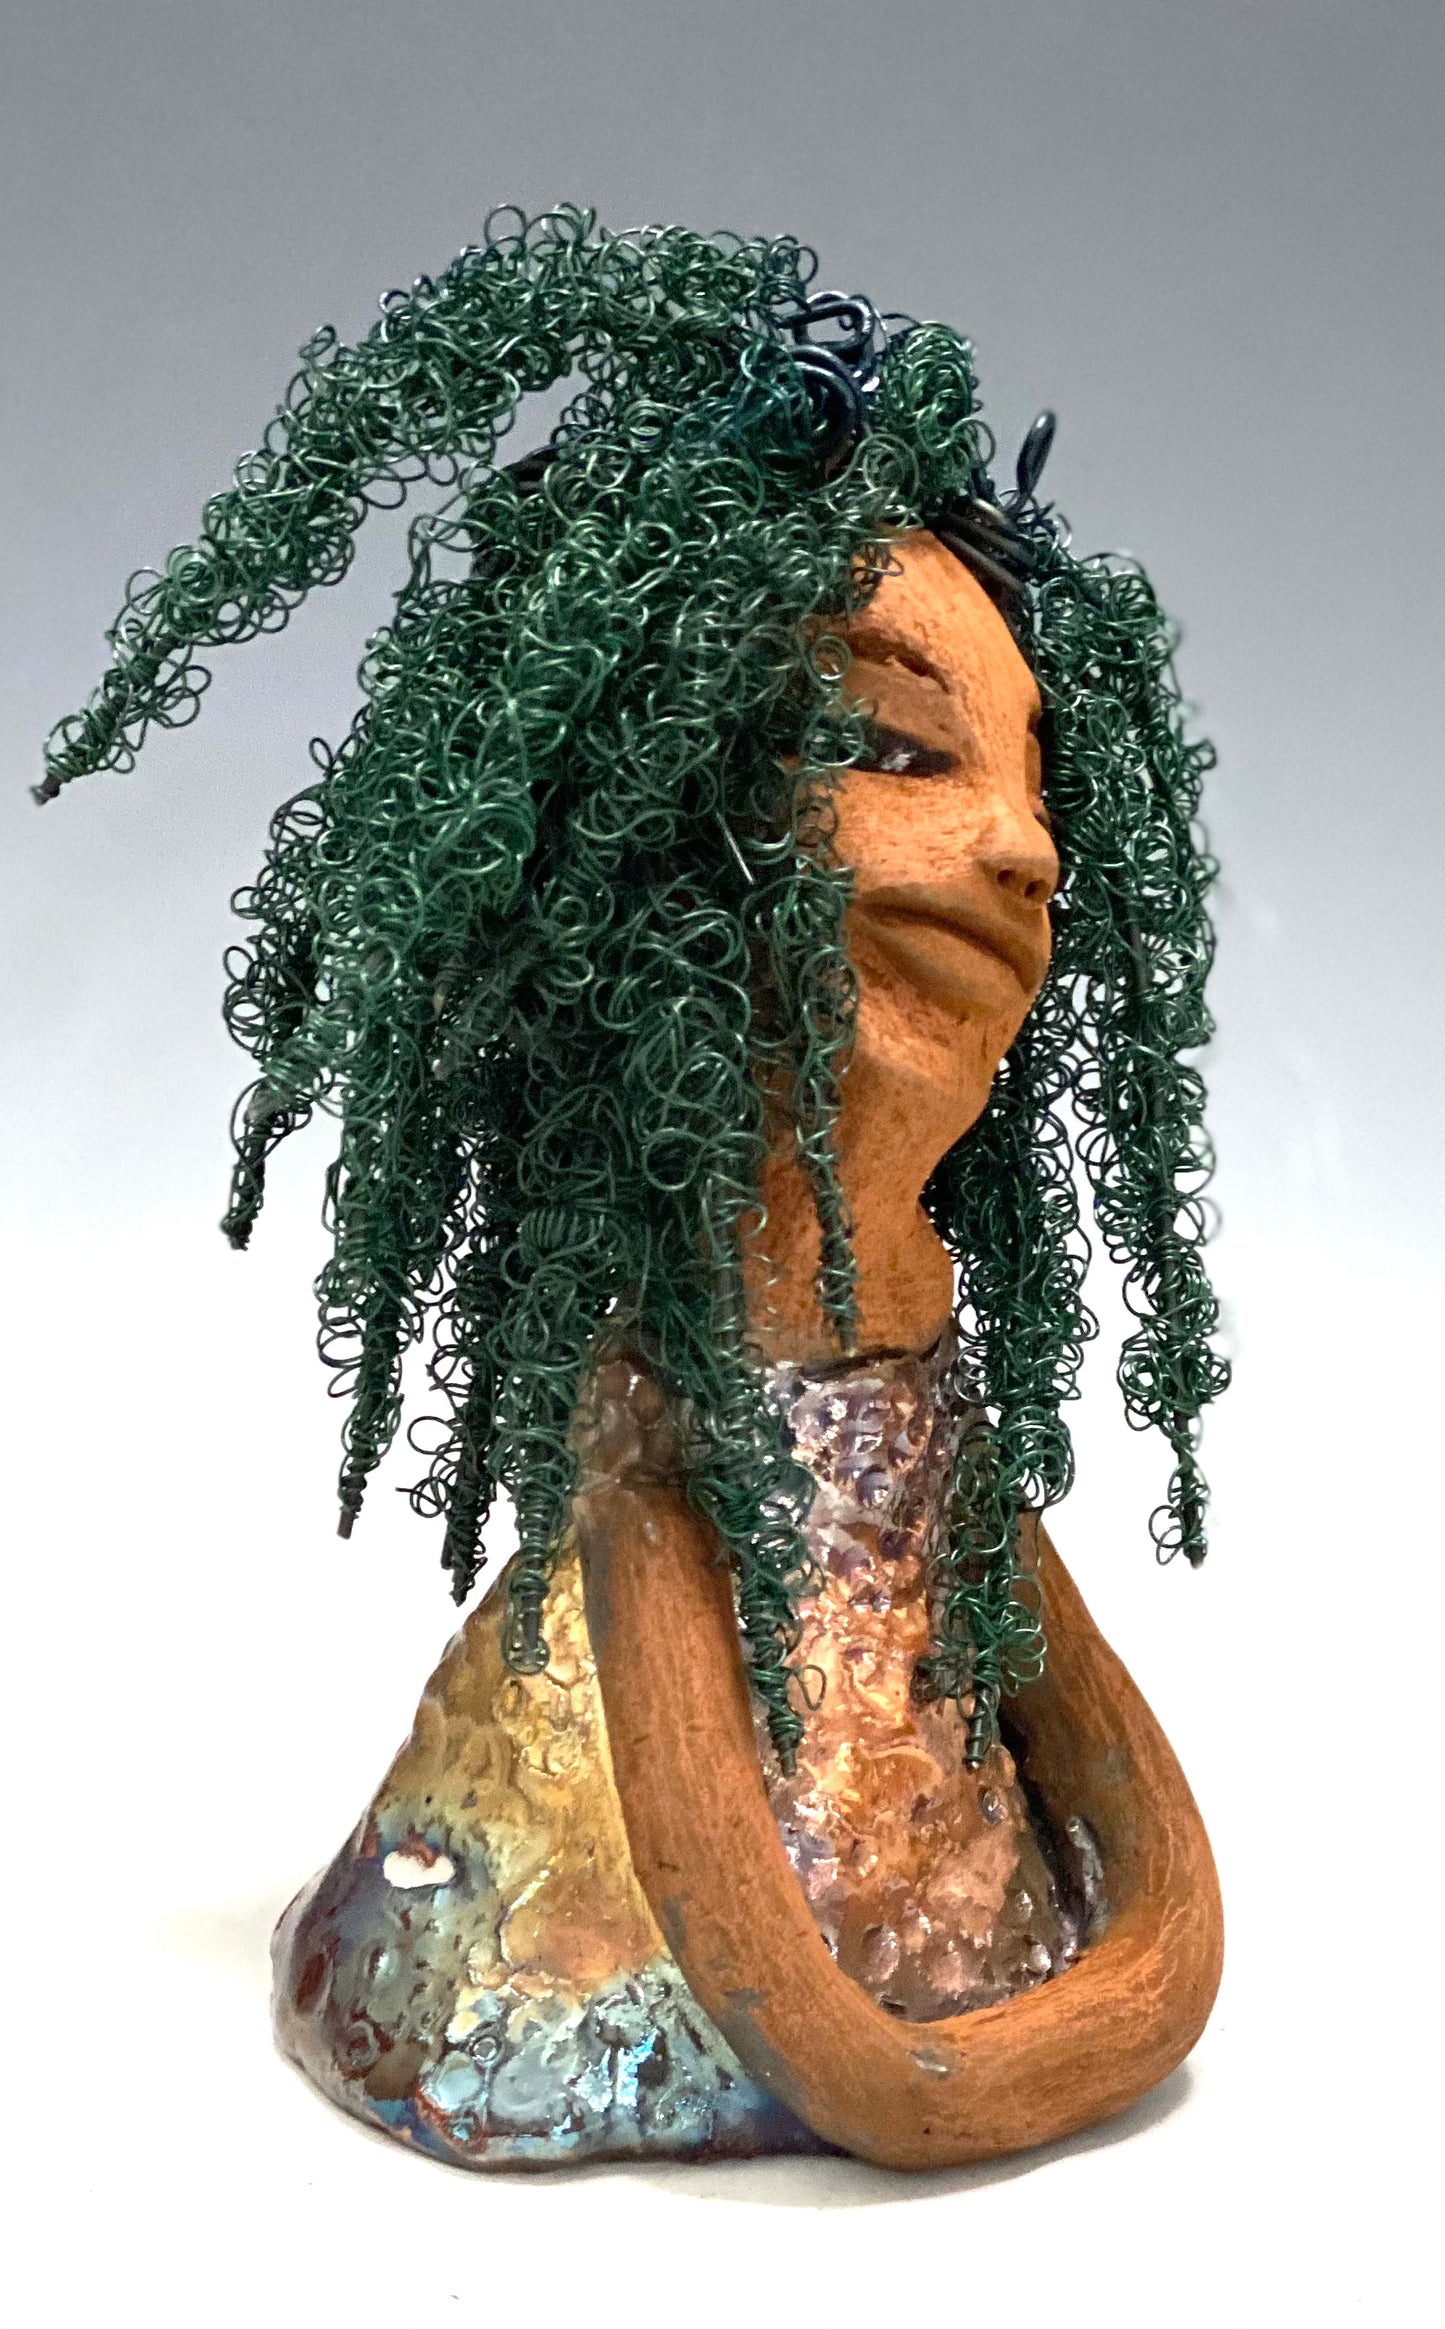 Nia Nia stands 8" x 5" x 5.5" and weighs 1.04 lbs. She has a lovely honey brown complexion with soft brown lips. She has long twisted wire locs hairstyle waist down!  Nia has a glossy metallic copper glazed dress. She has over 75 feet of 16 and 24 gauge emerald green wire for hair. It really took over 6 hours just to twist and do her hair! With  eyes wide opened, Alexis has hope of finding a new home.   